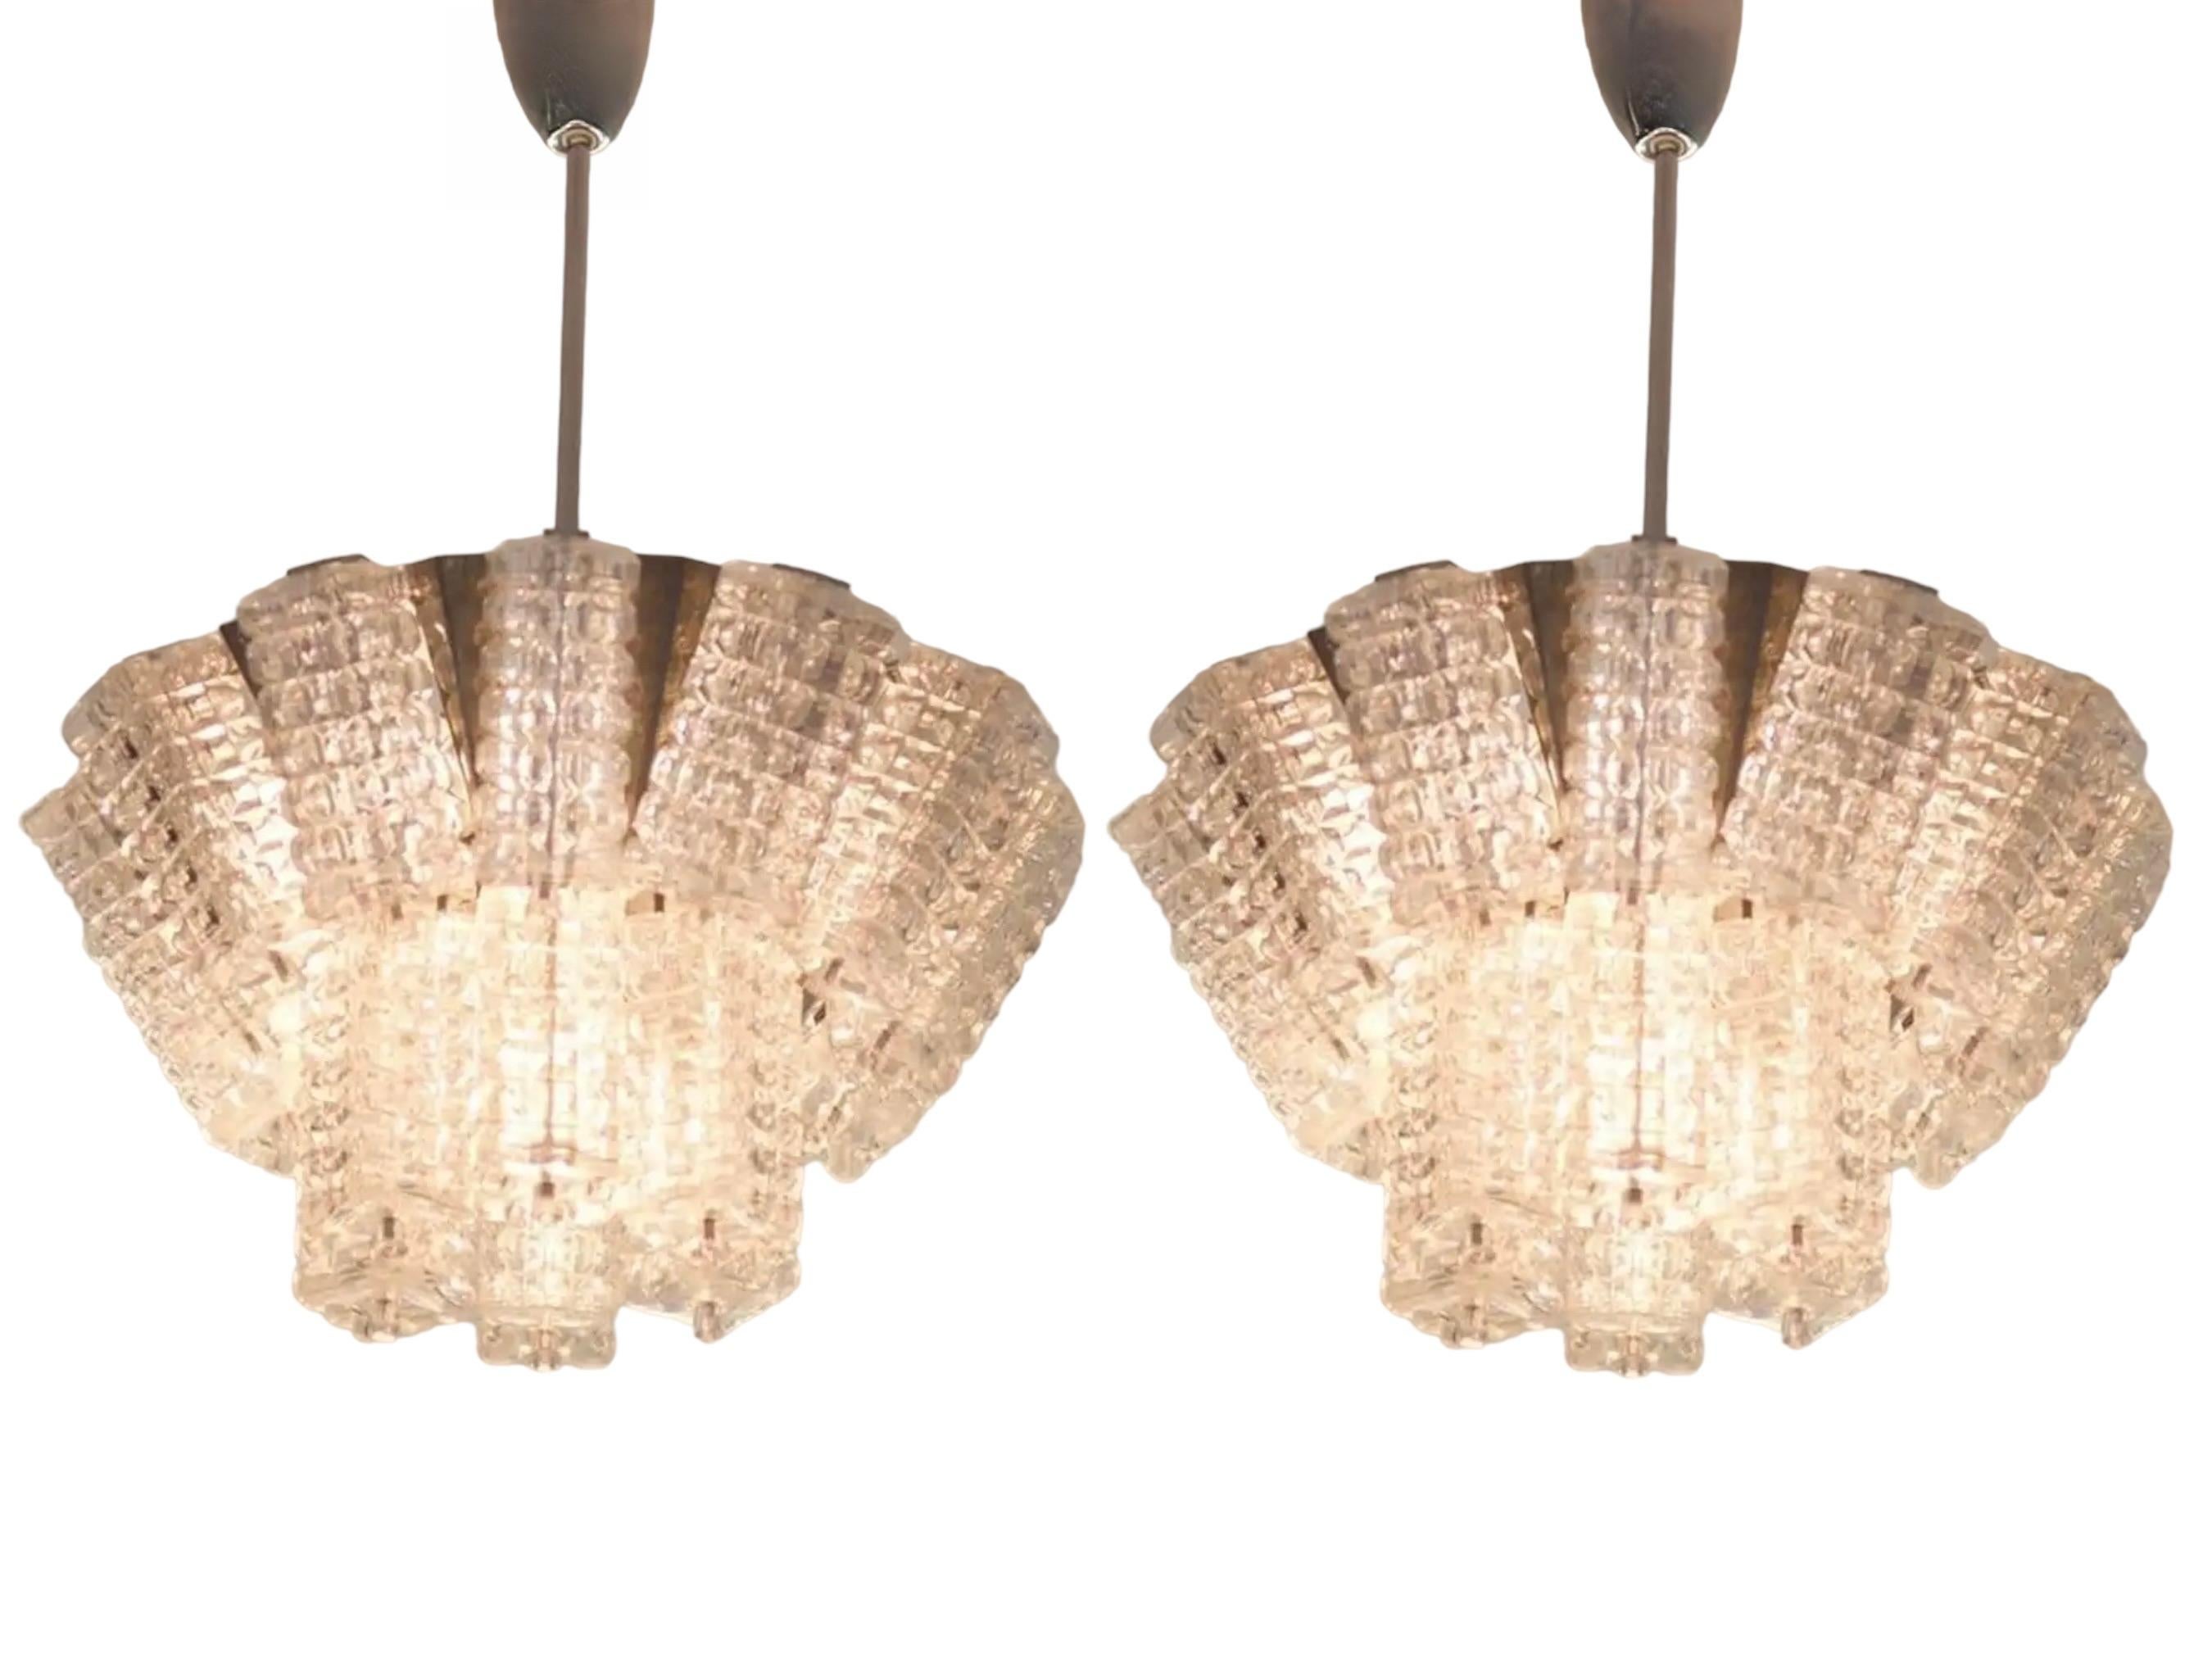 A beautiful pair of Austrian chandeliers by Austrolux, Vienna, manufactured in the mid-century, circa 1960s (late 1960s or early 1970s). Each lamp consists of a silver-colored metal frame containing triangular chrome-plated or nickel-plated elements